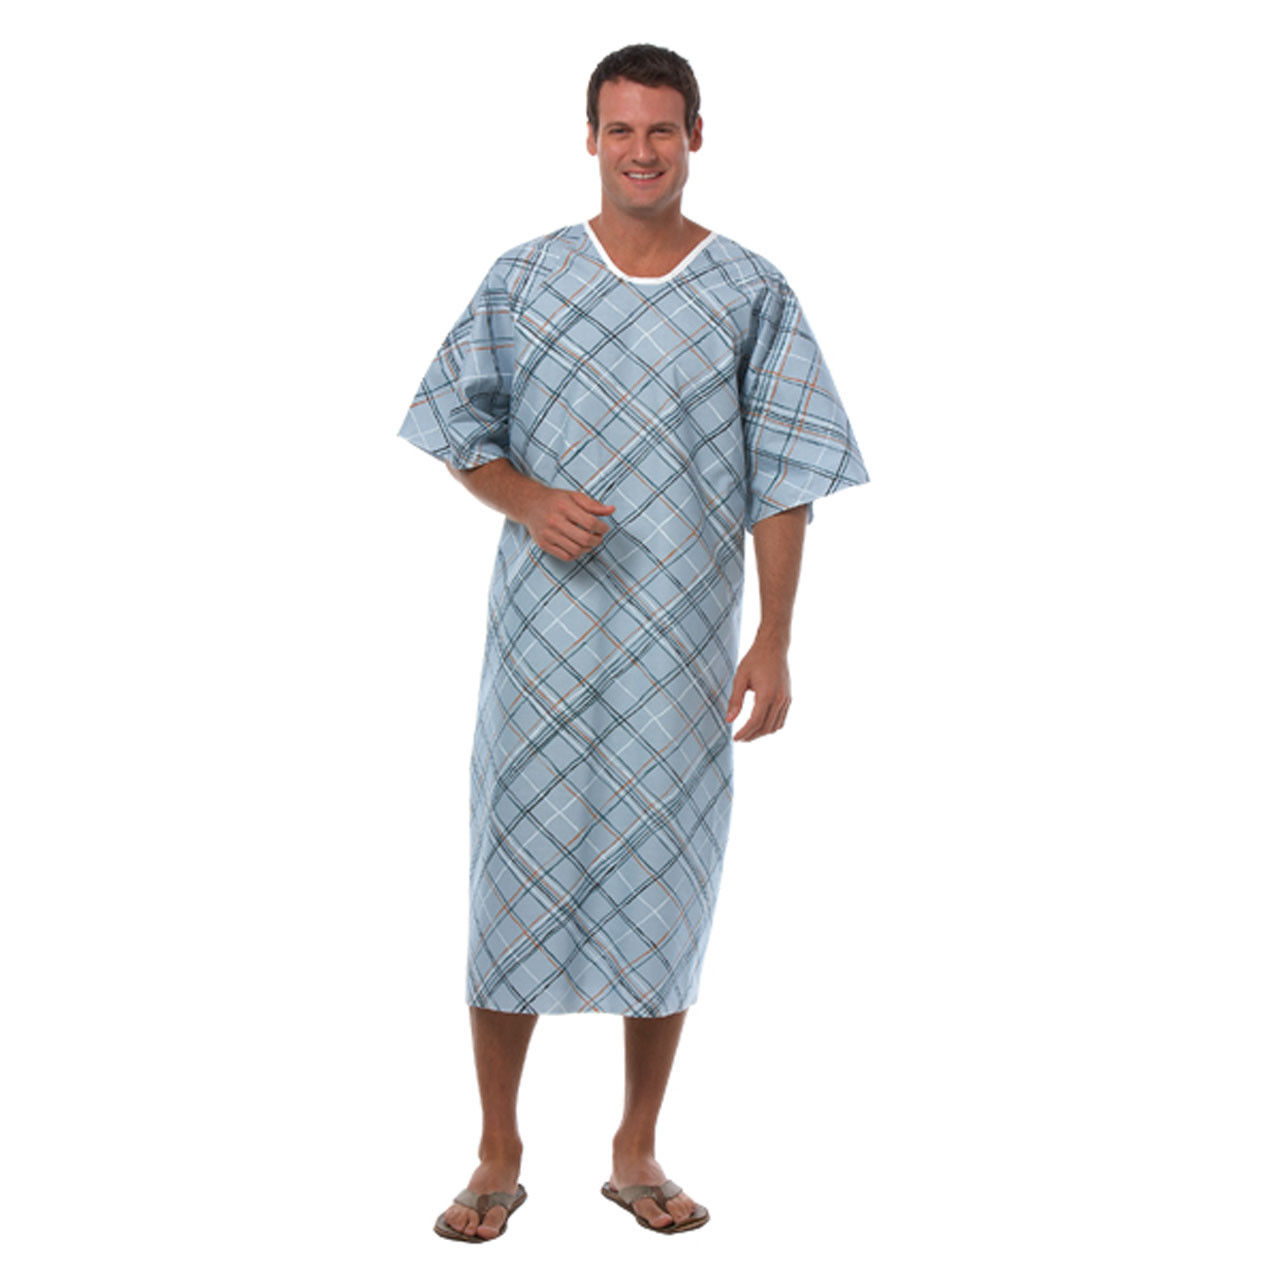 Are these hospital gowns suitable for use in any specific setting?